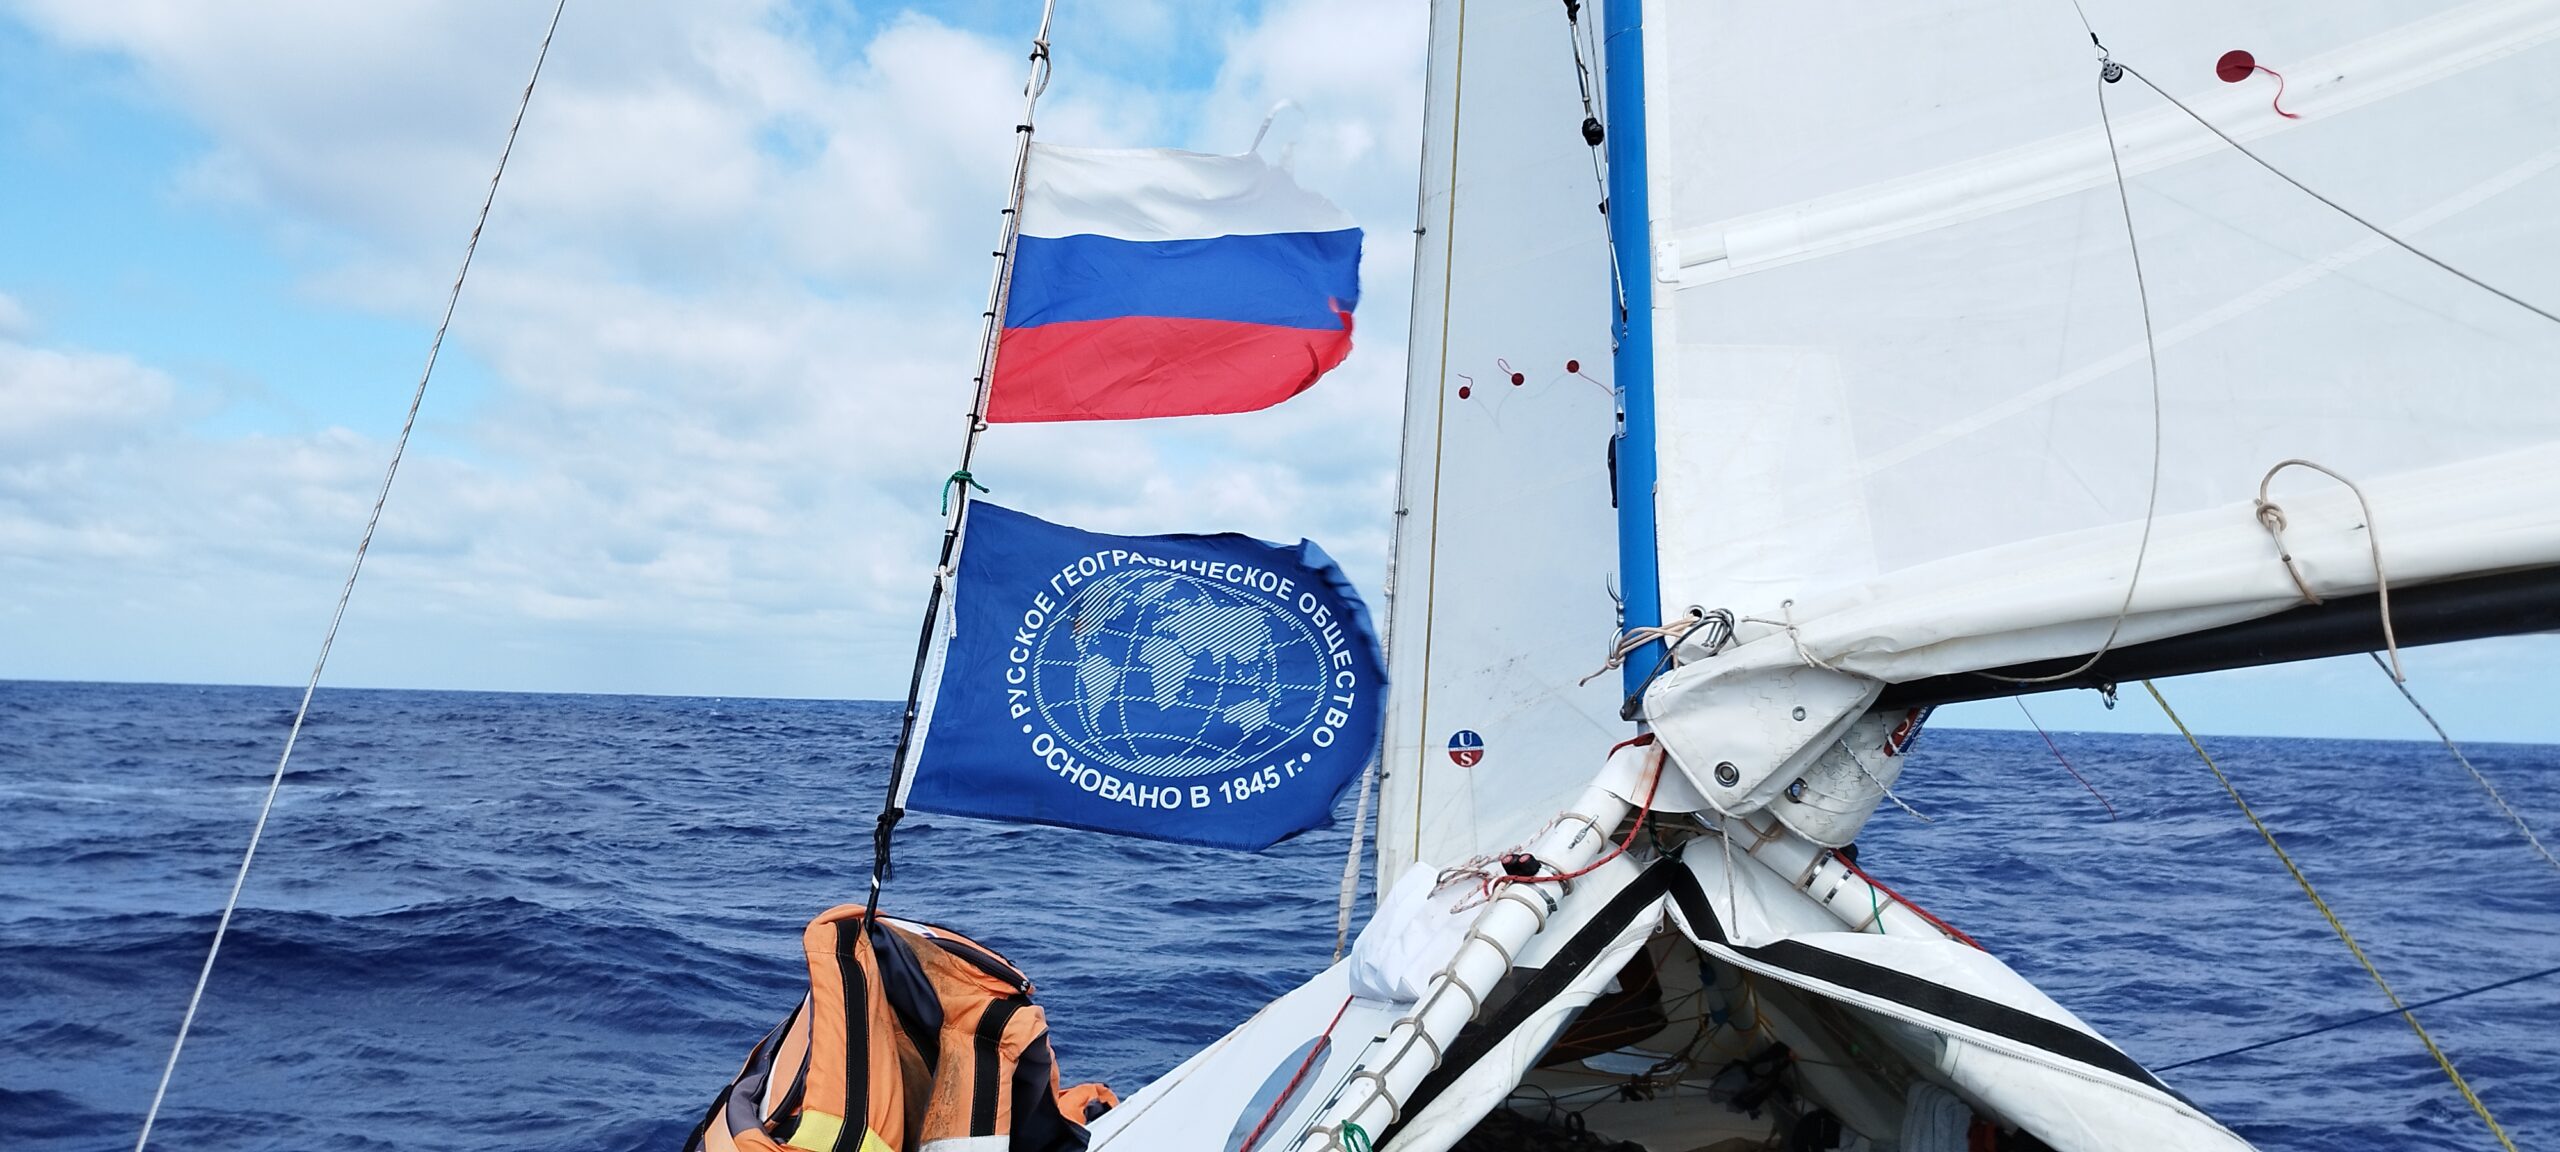 The Russian Geographical Society’s round-the-world expedition has arrived on the shores of Fiji